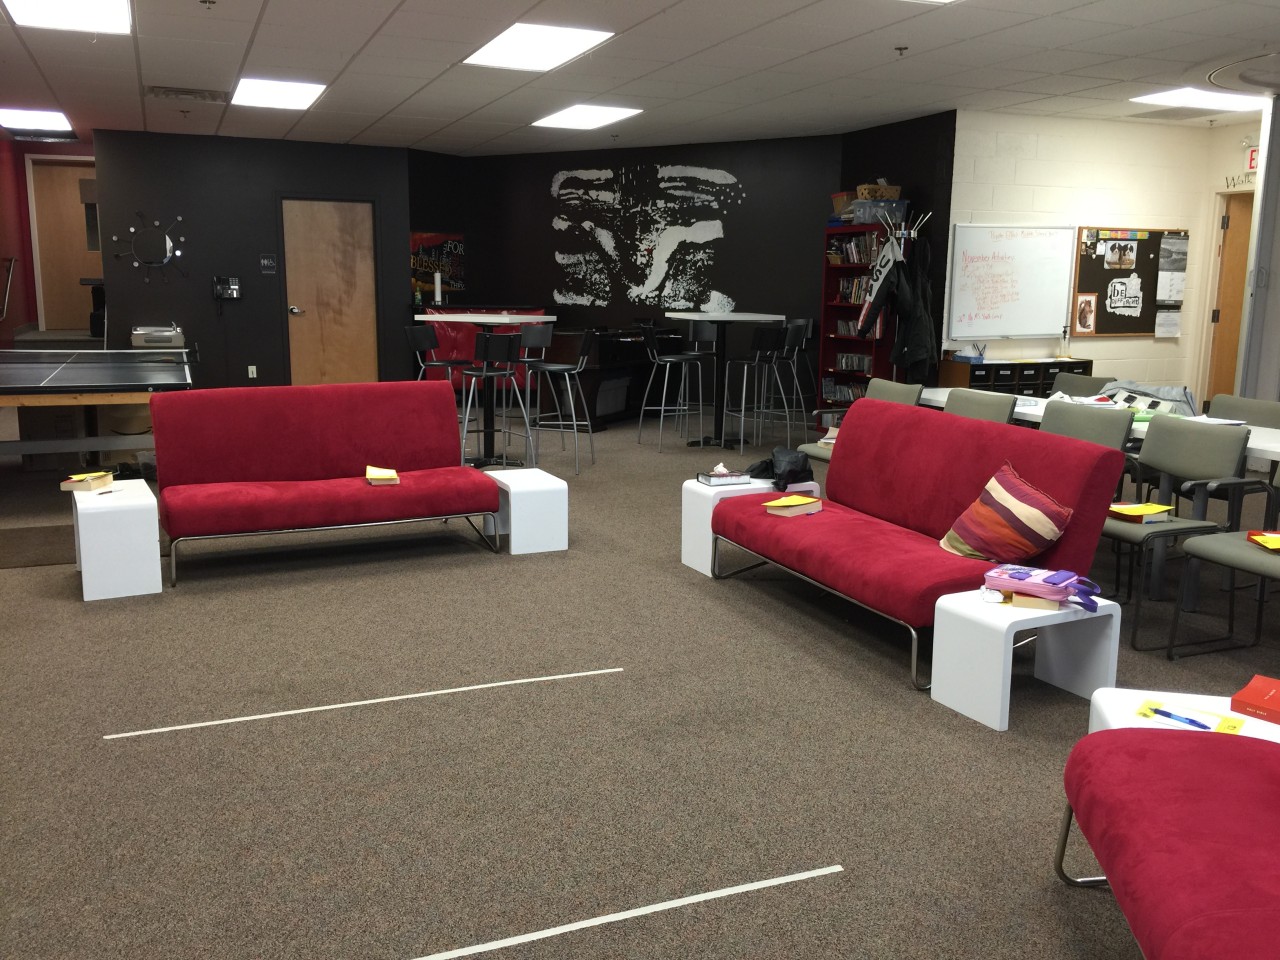 Our Middle School Youth Room!